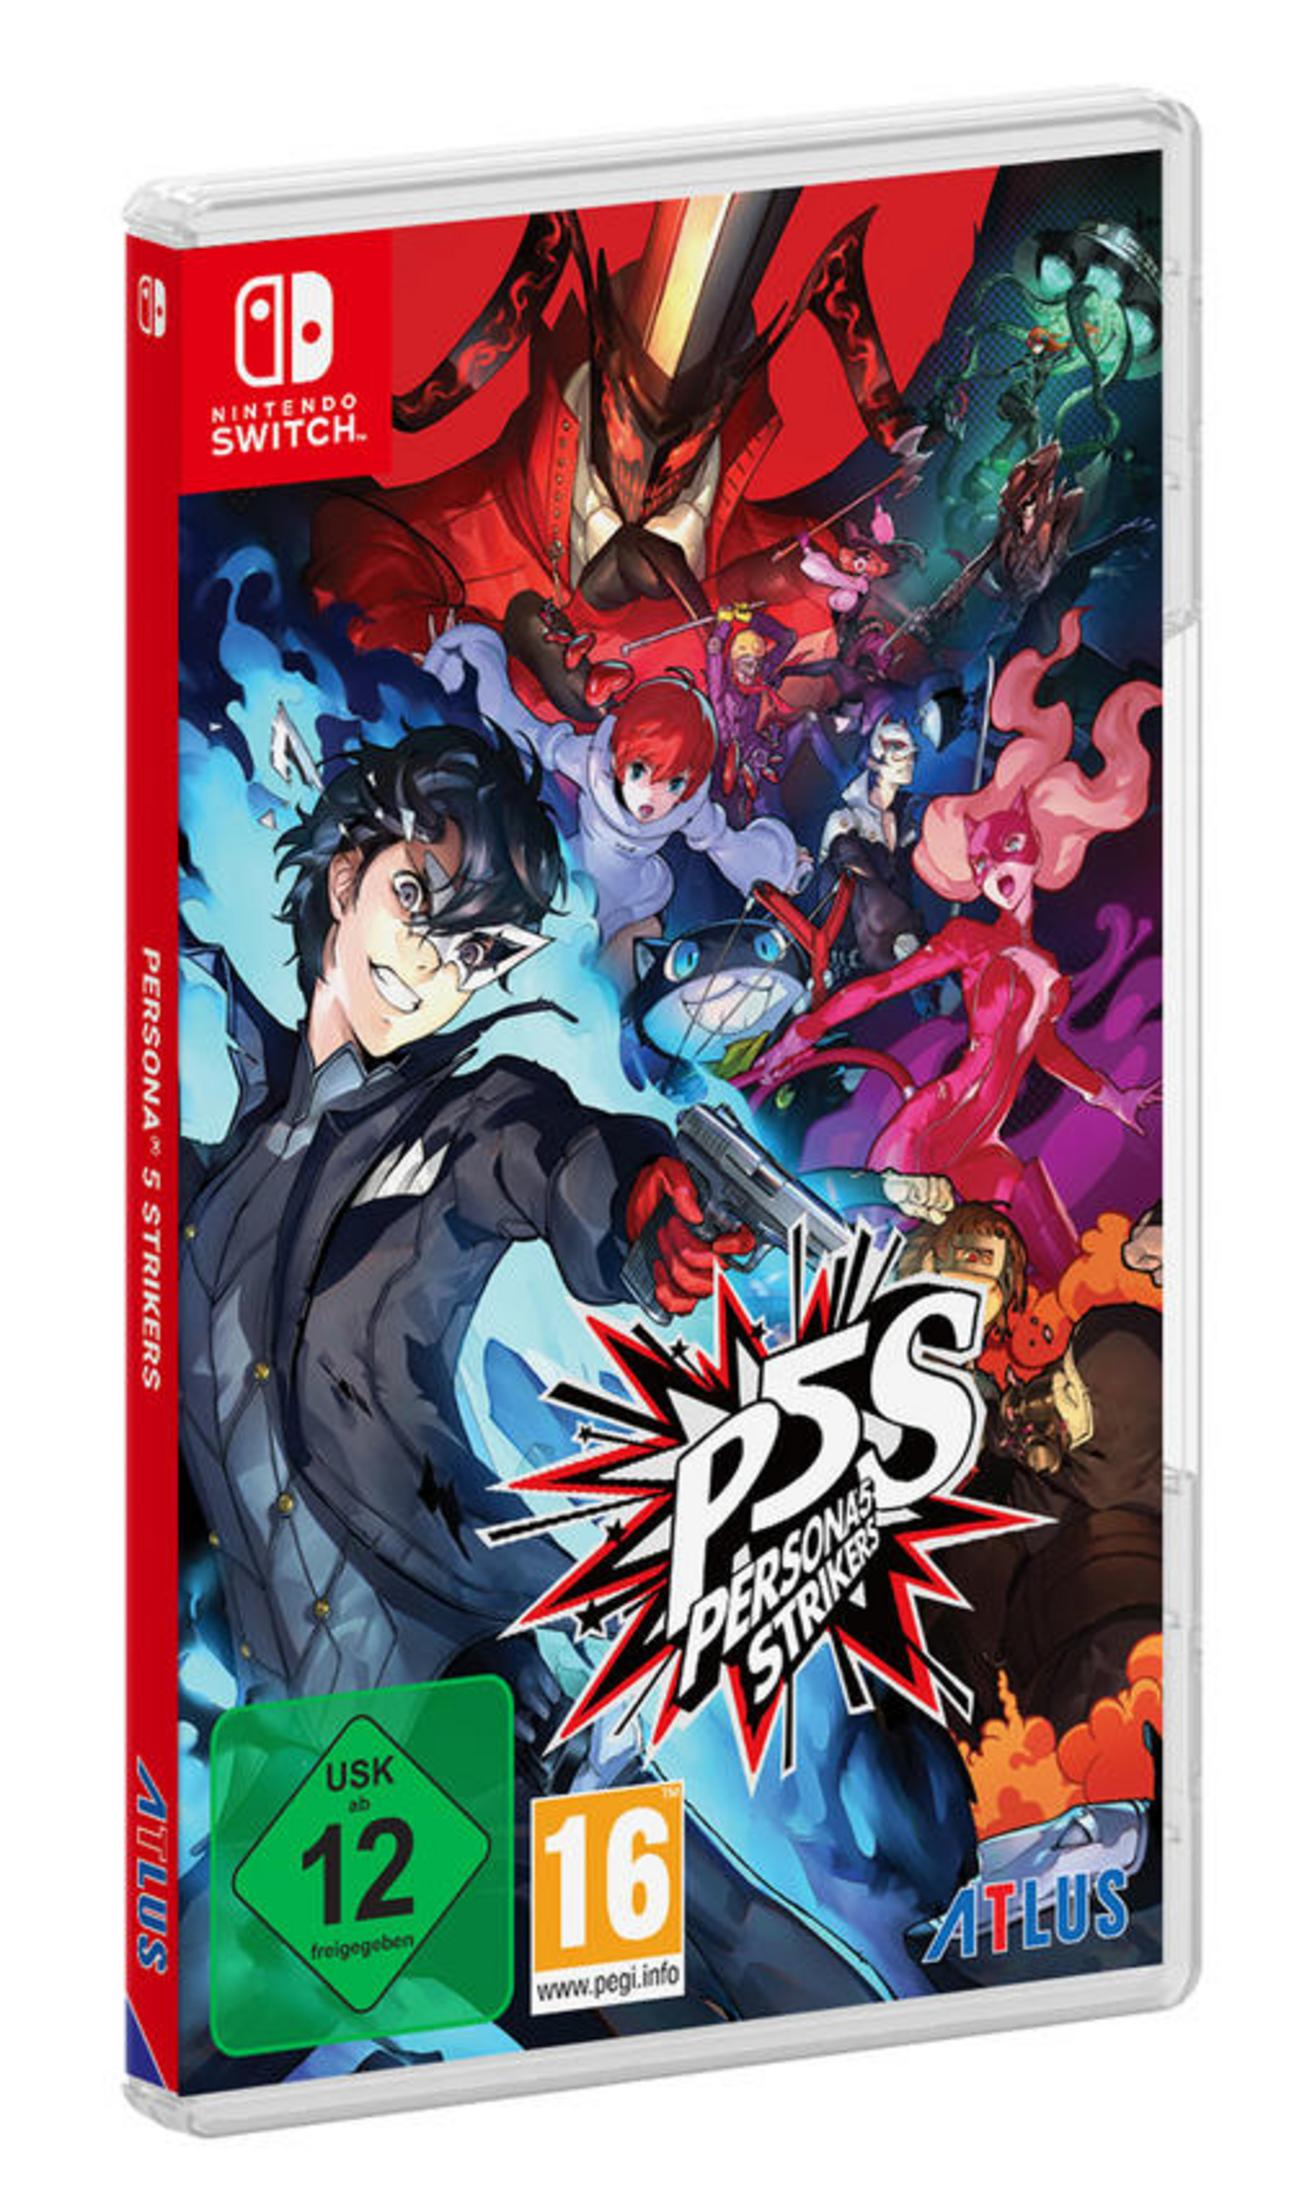 [Nintendo Edition 5 - Persona Strikers Switch] Limited